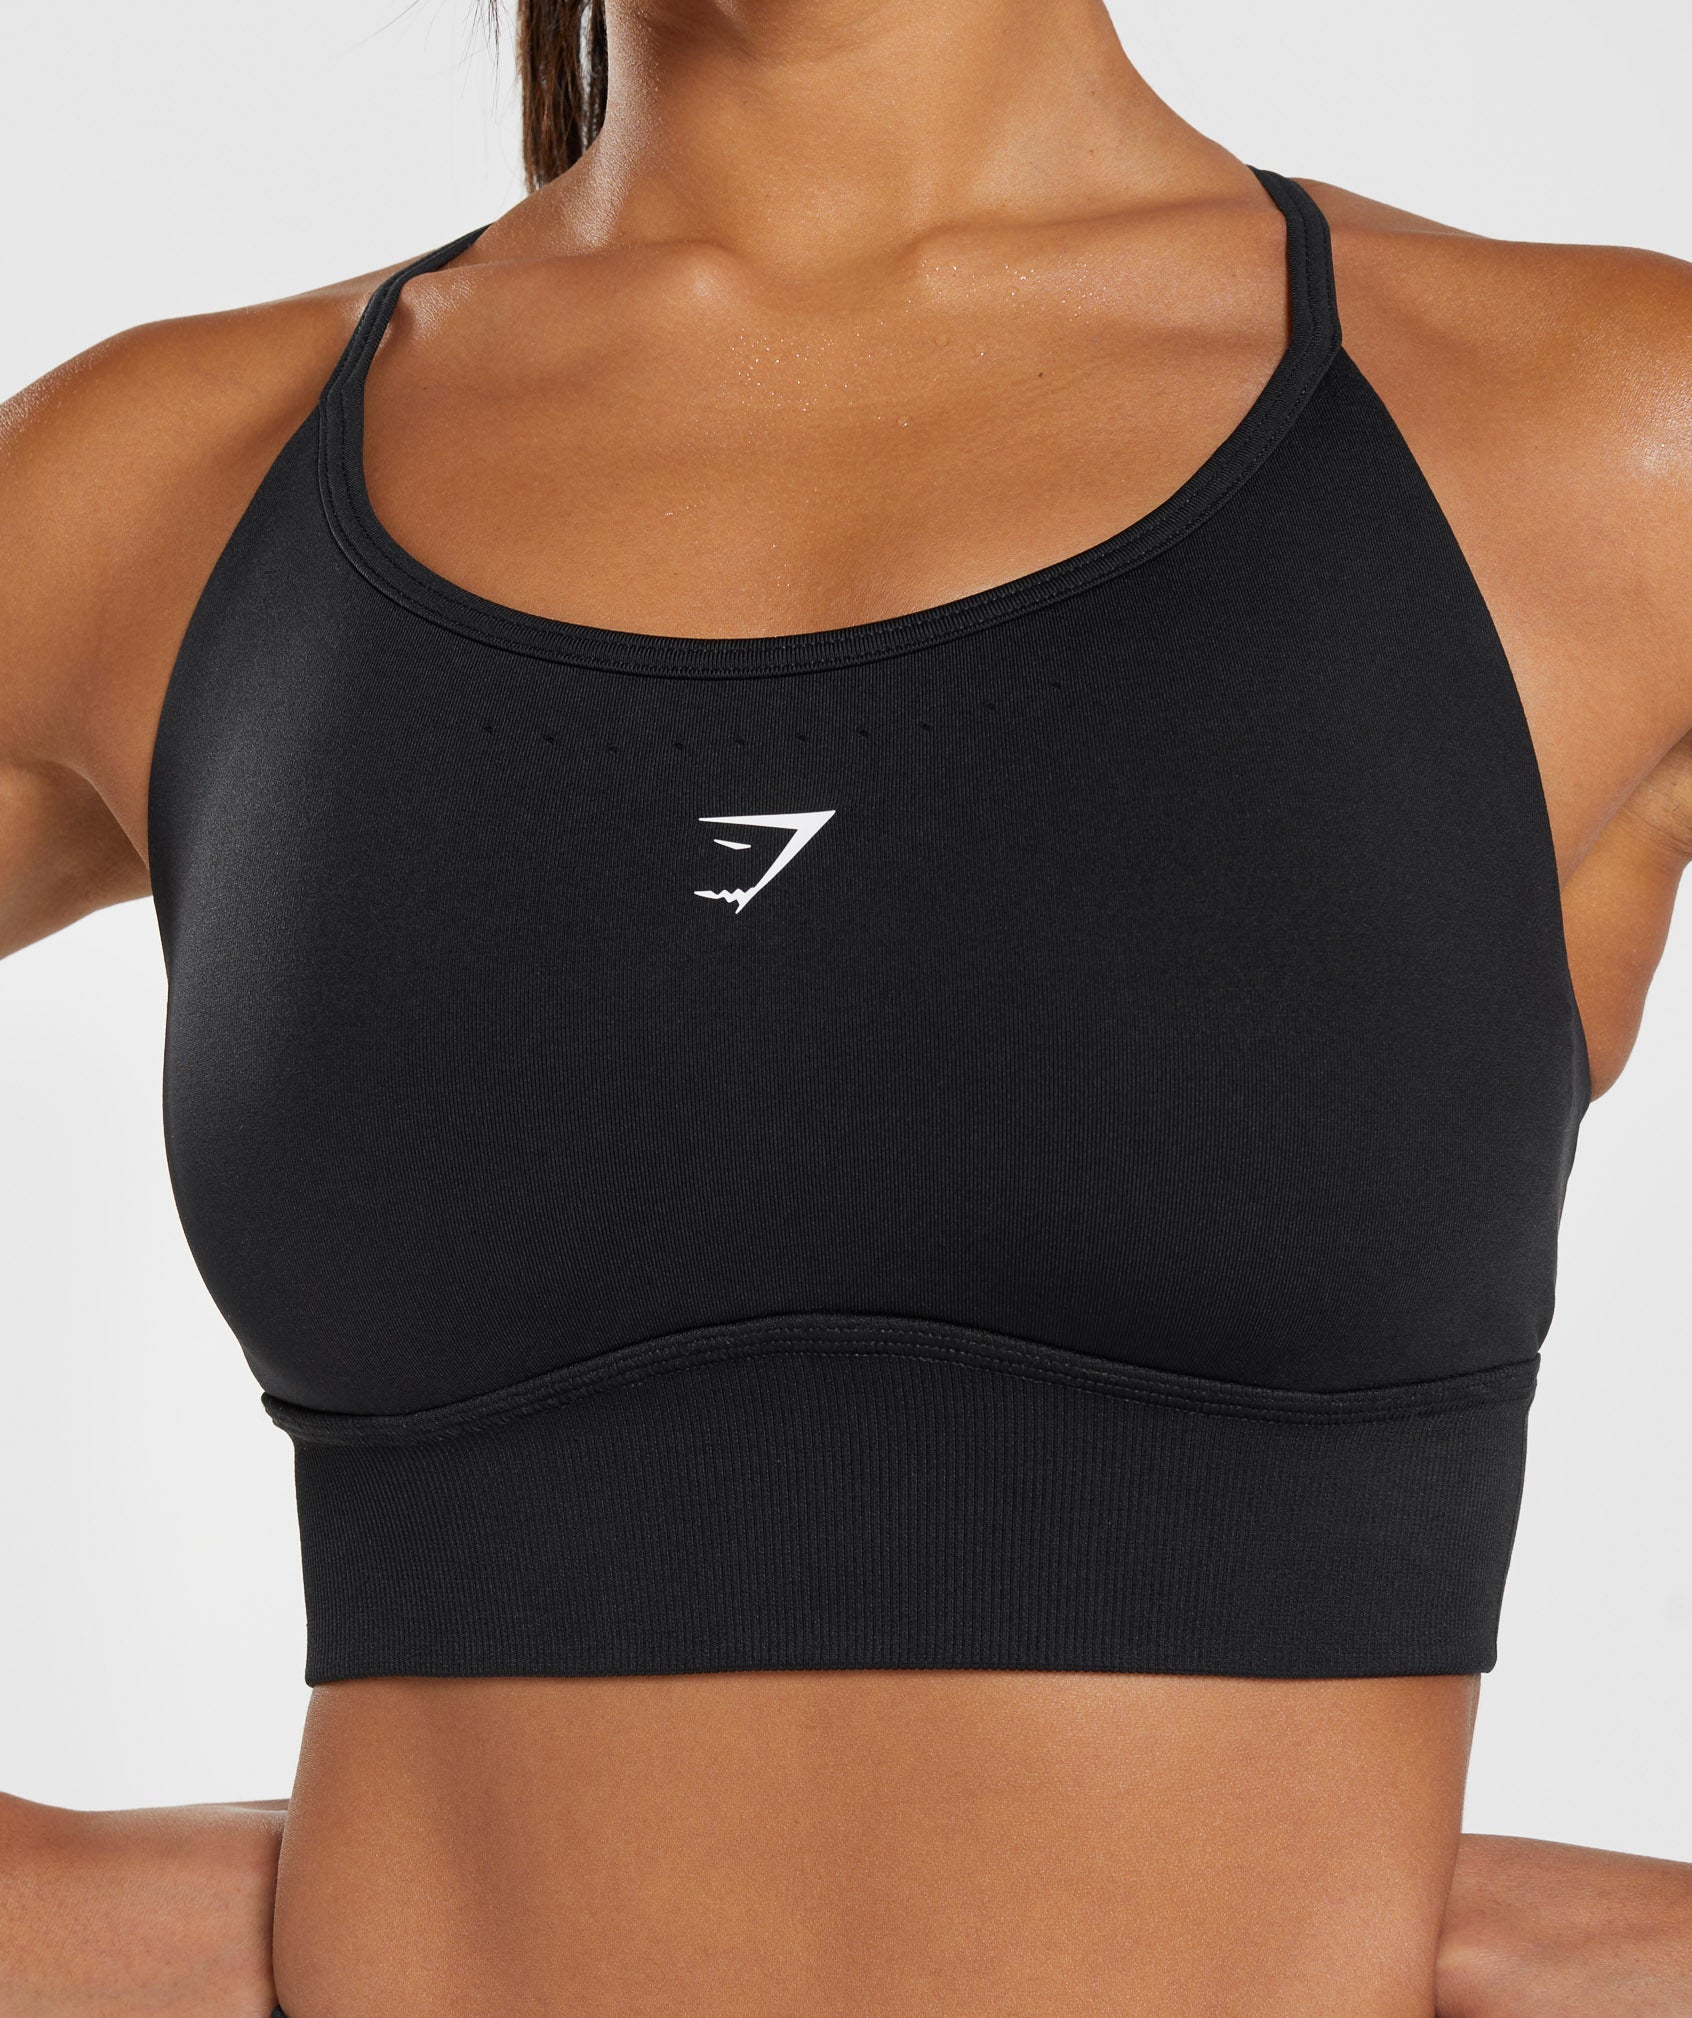 Gymshark S Fit Seamless Sports Bra - $12 - From Jamine